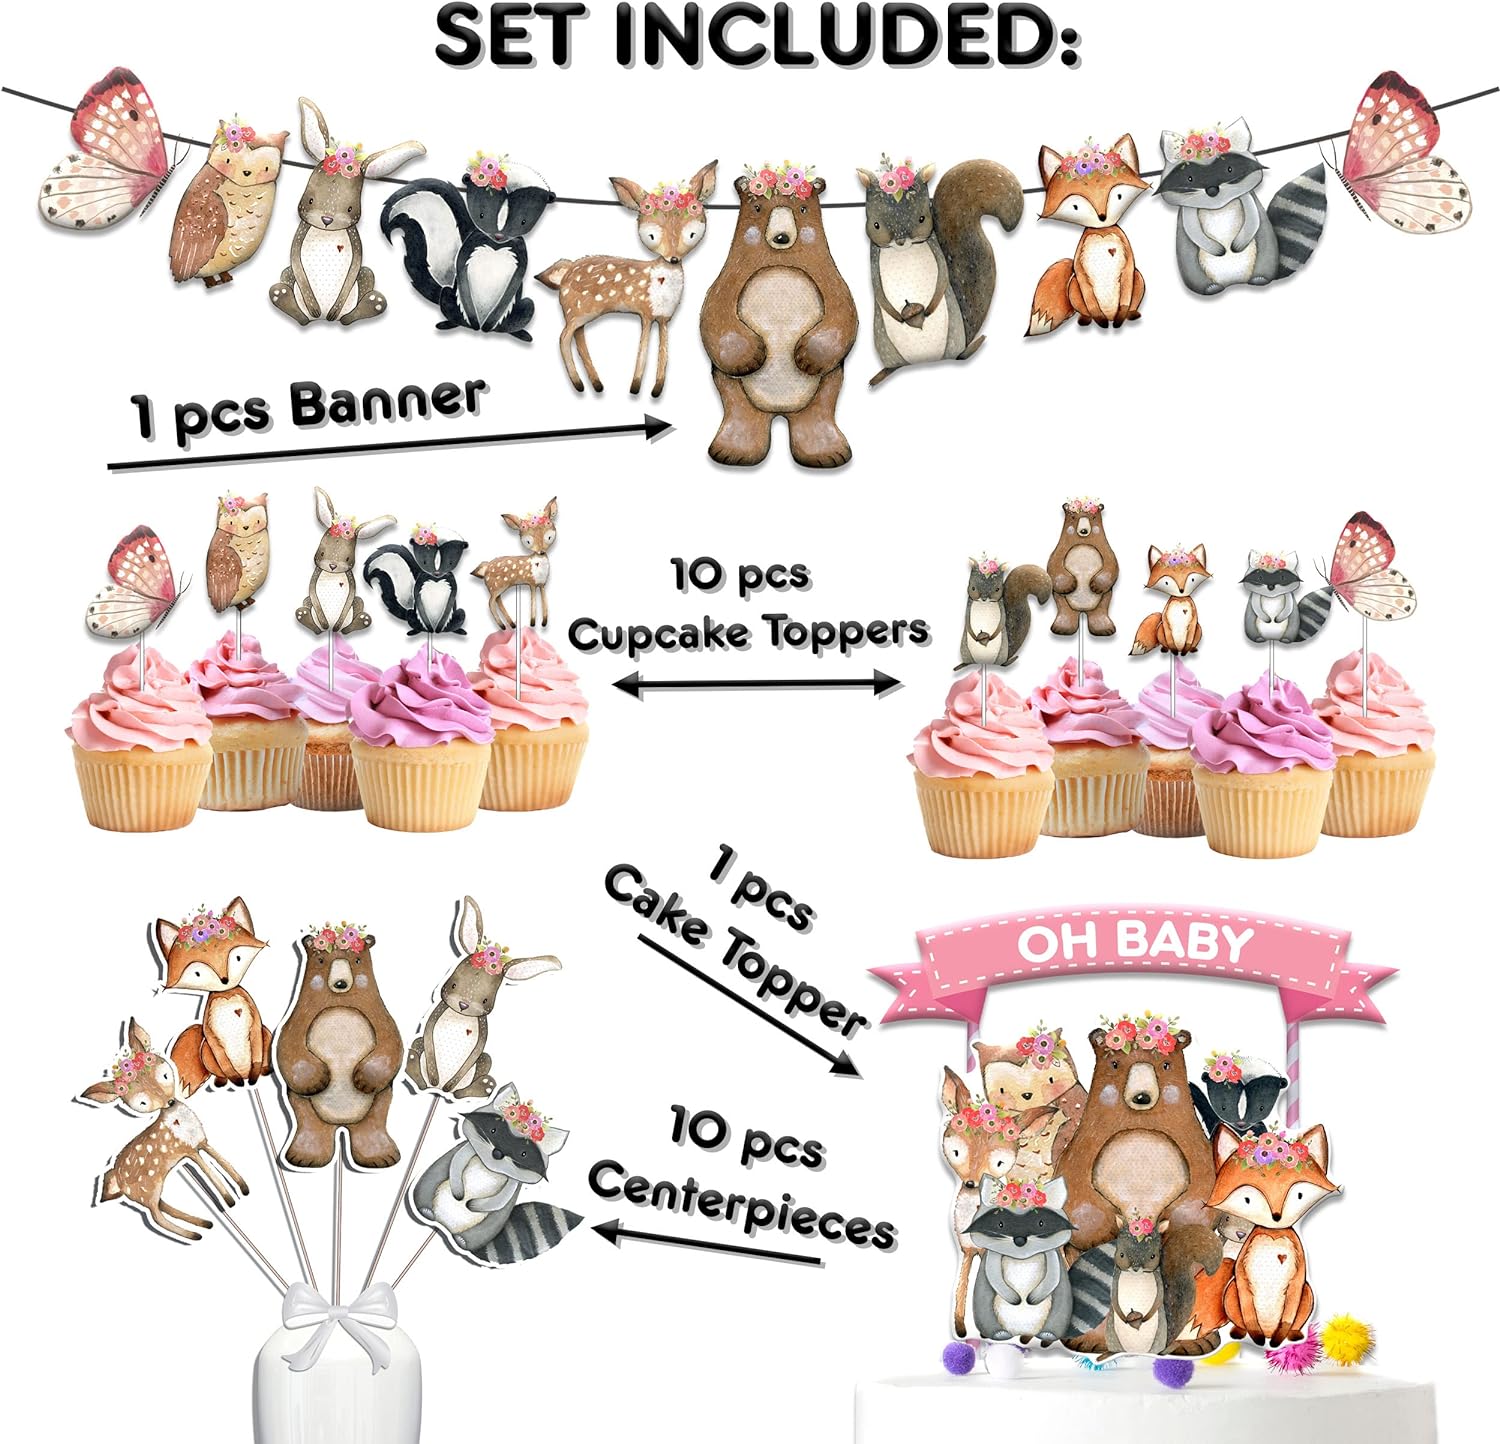 Enchanting Woodland Creatures Party Set For Girls - Complete Decoration Kit with Banner, Cupcake Toppers, and Centerpieces